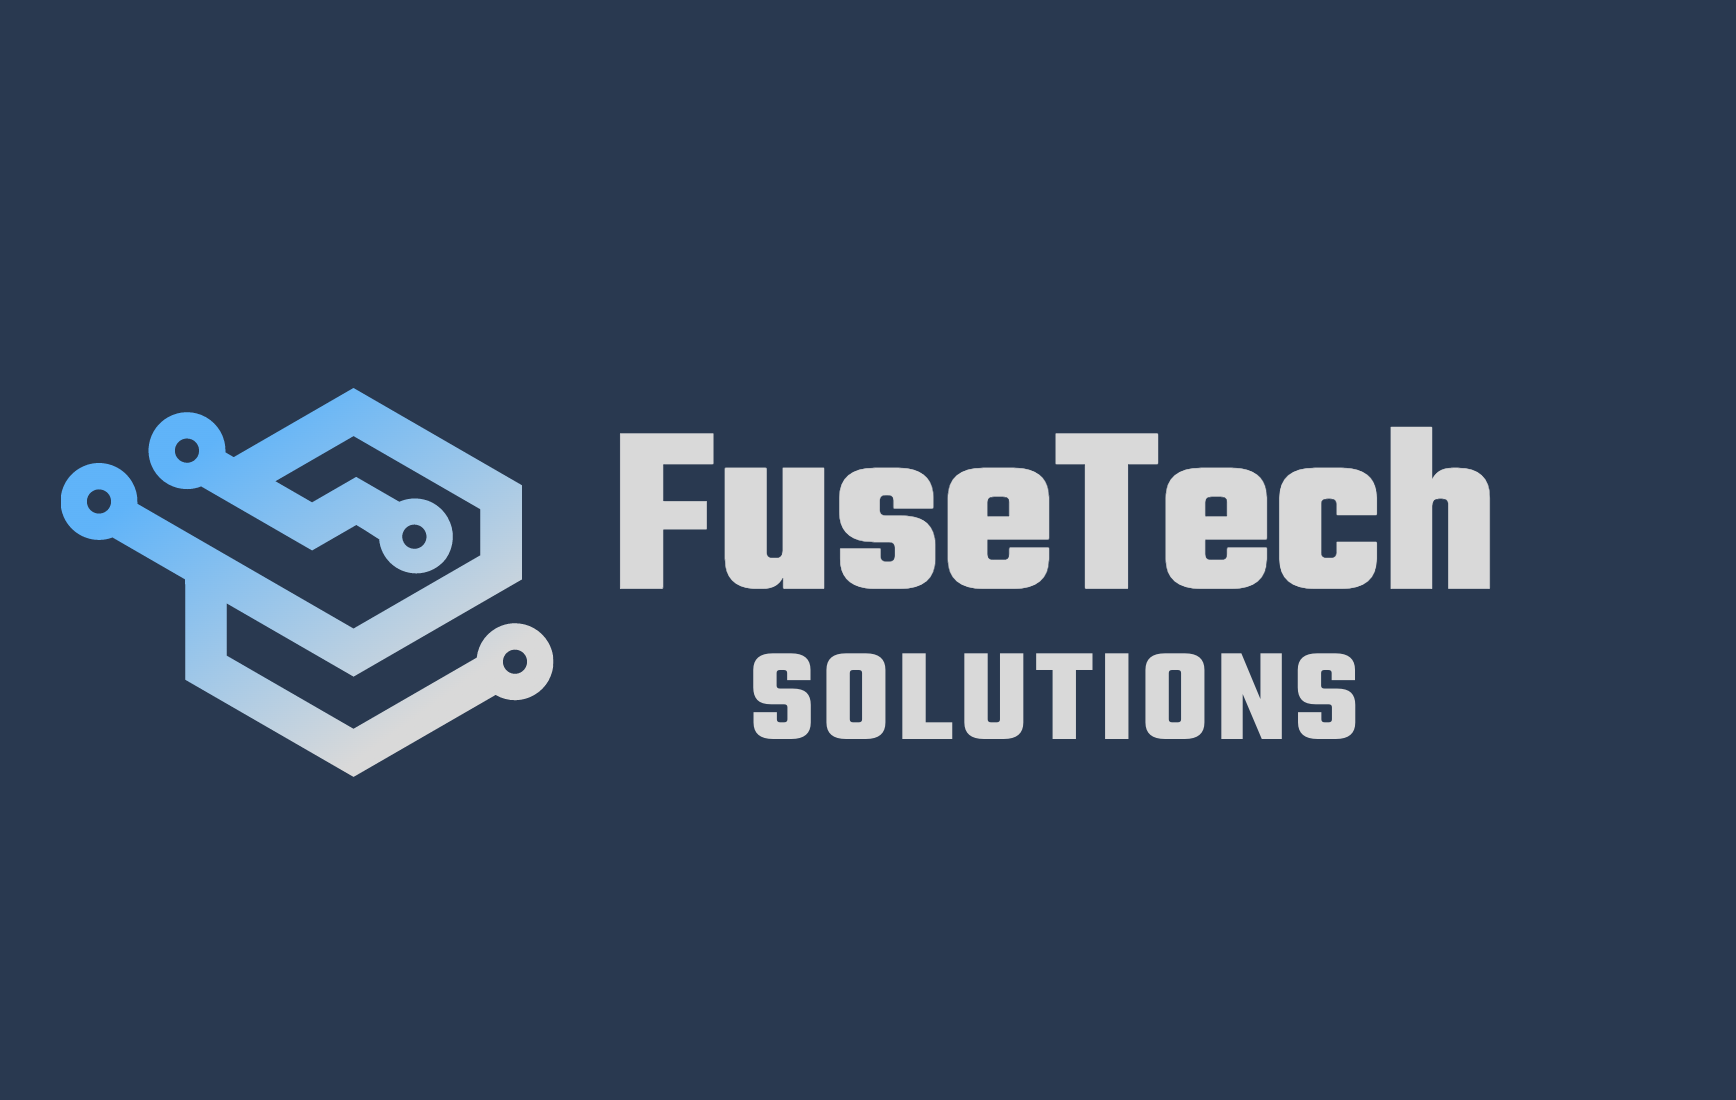 FuseTech Solutions